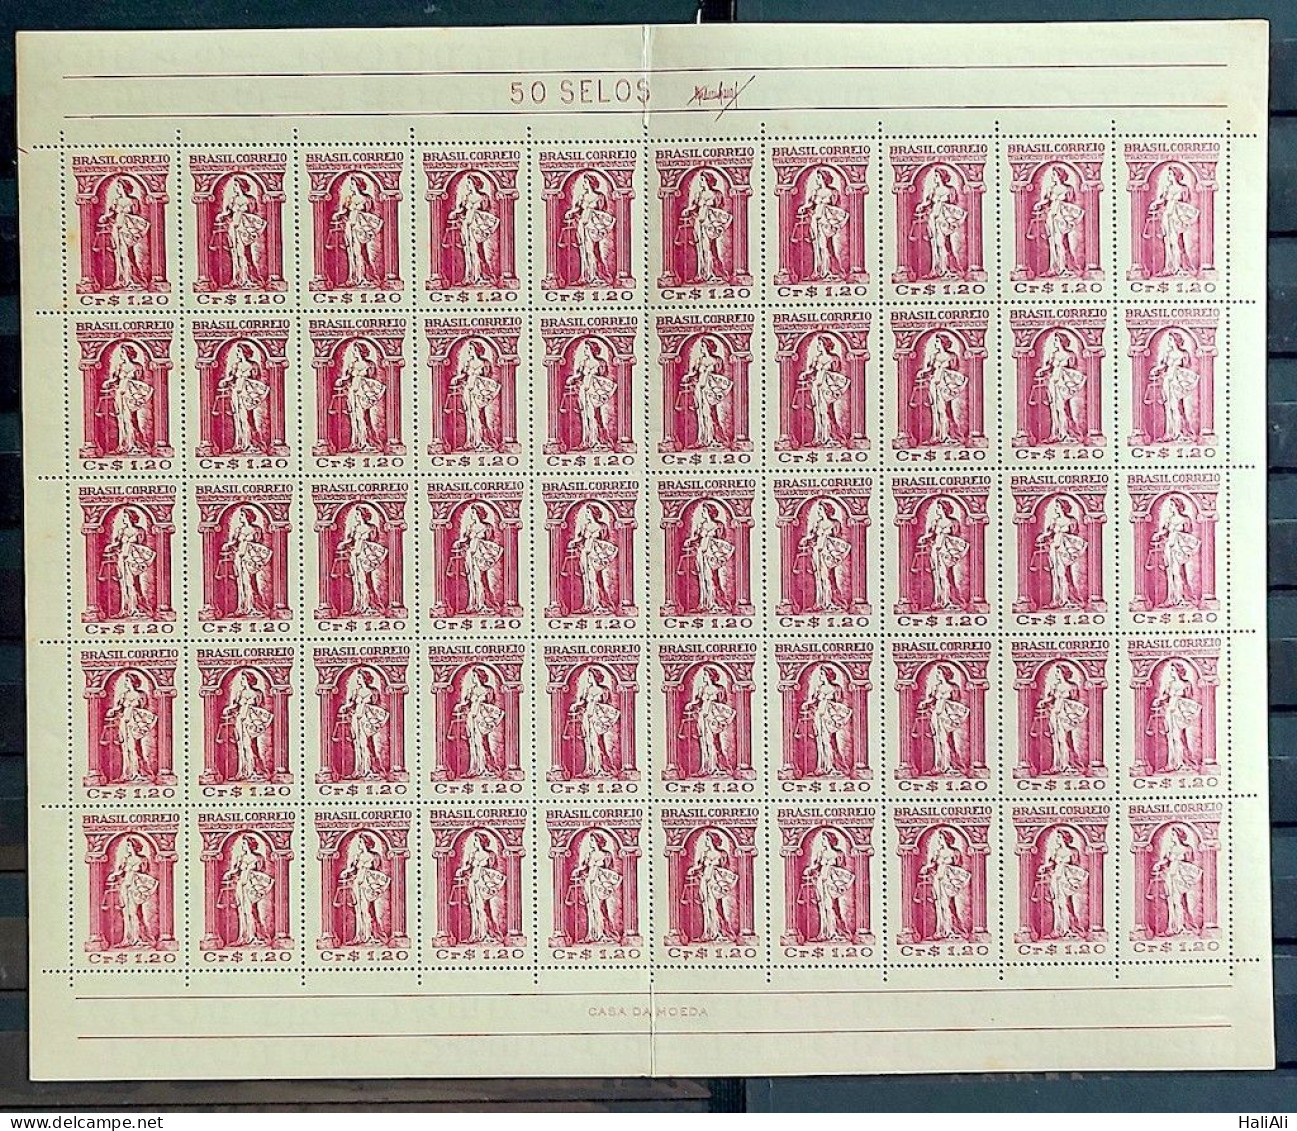 C 321 Brazil Stamp Fiftieth Anniversary Of The Treaty Of Petropolis Justice Rights Map 1953 Sheet - Unused Stamps